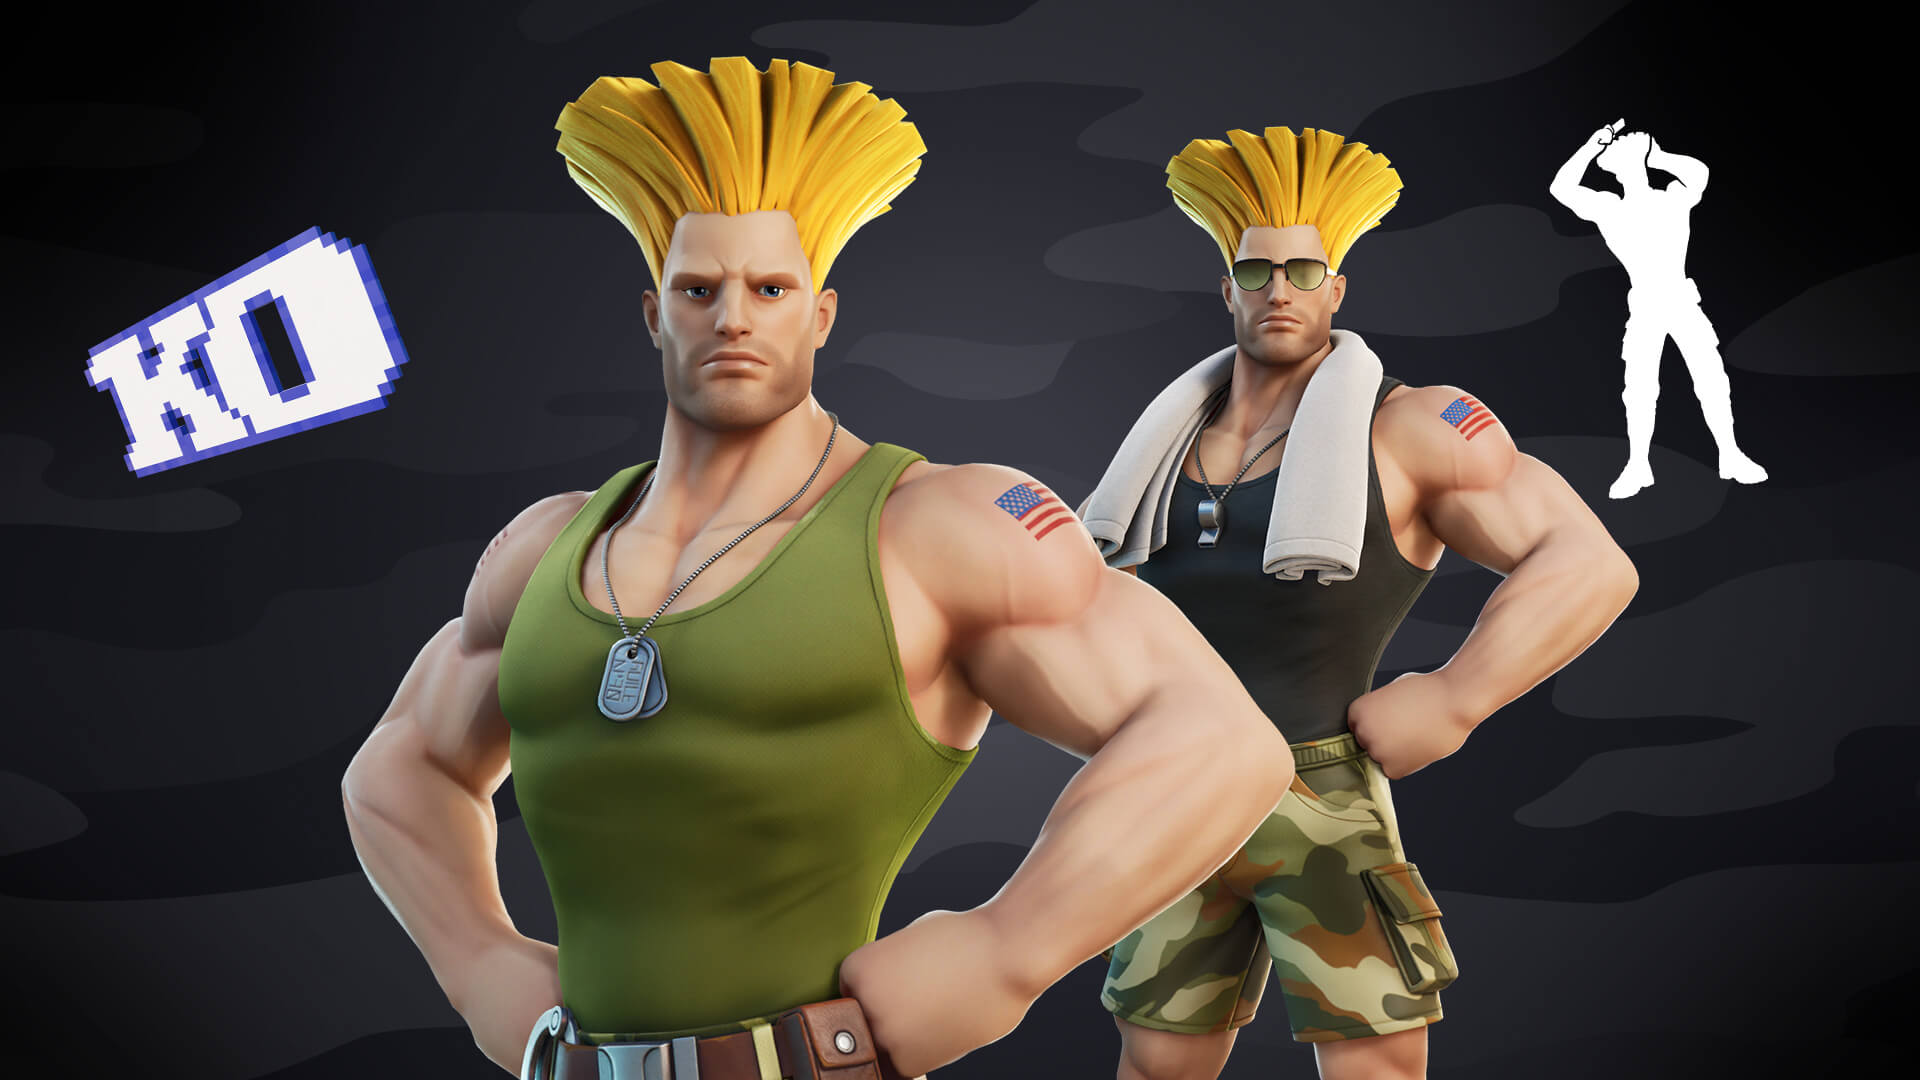 Street Fighter returns to Fortnite for Round 2